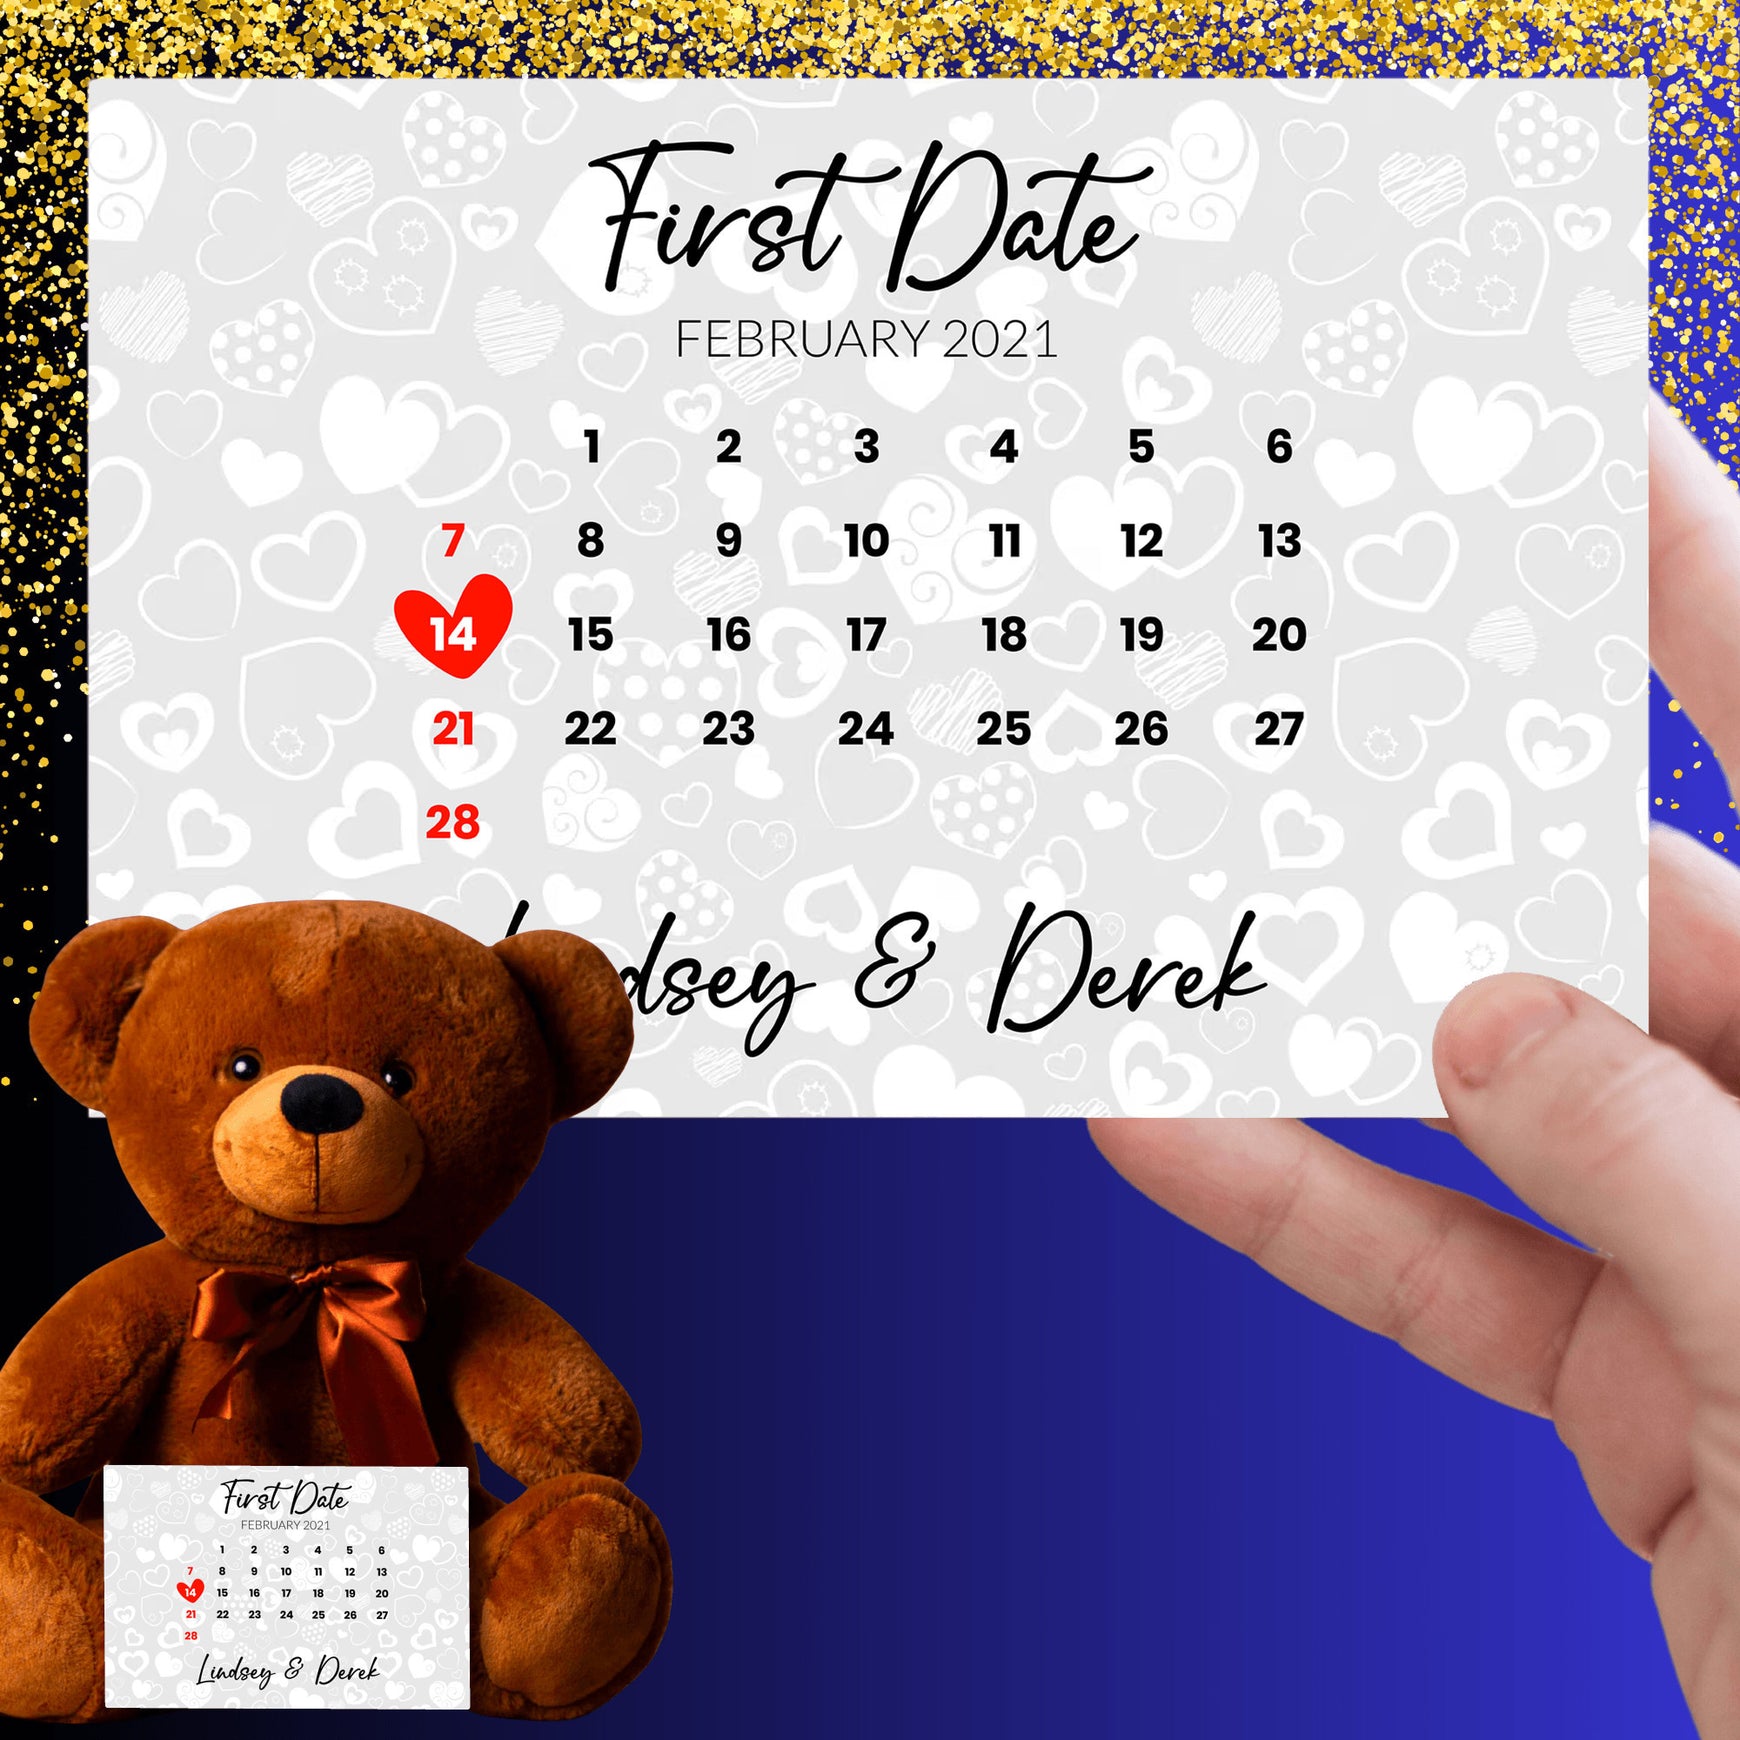 Our First Date Personalized Teddy Bear With Message Card - Price Includes Free Shipping